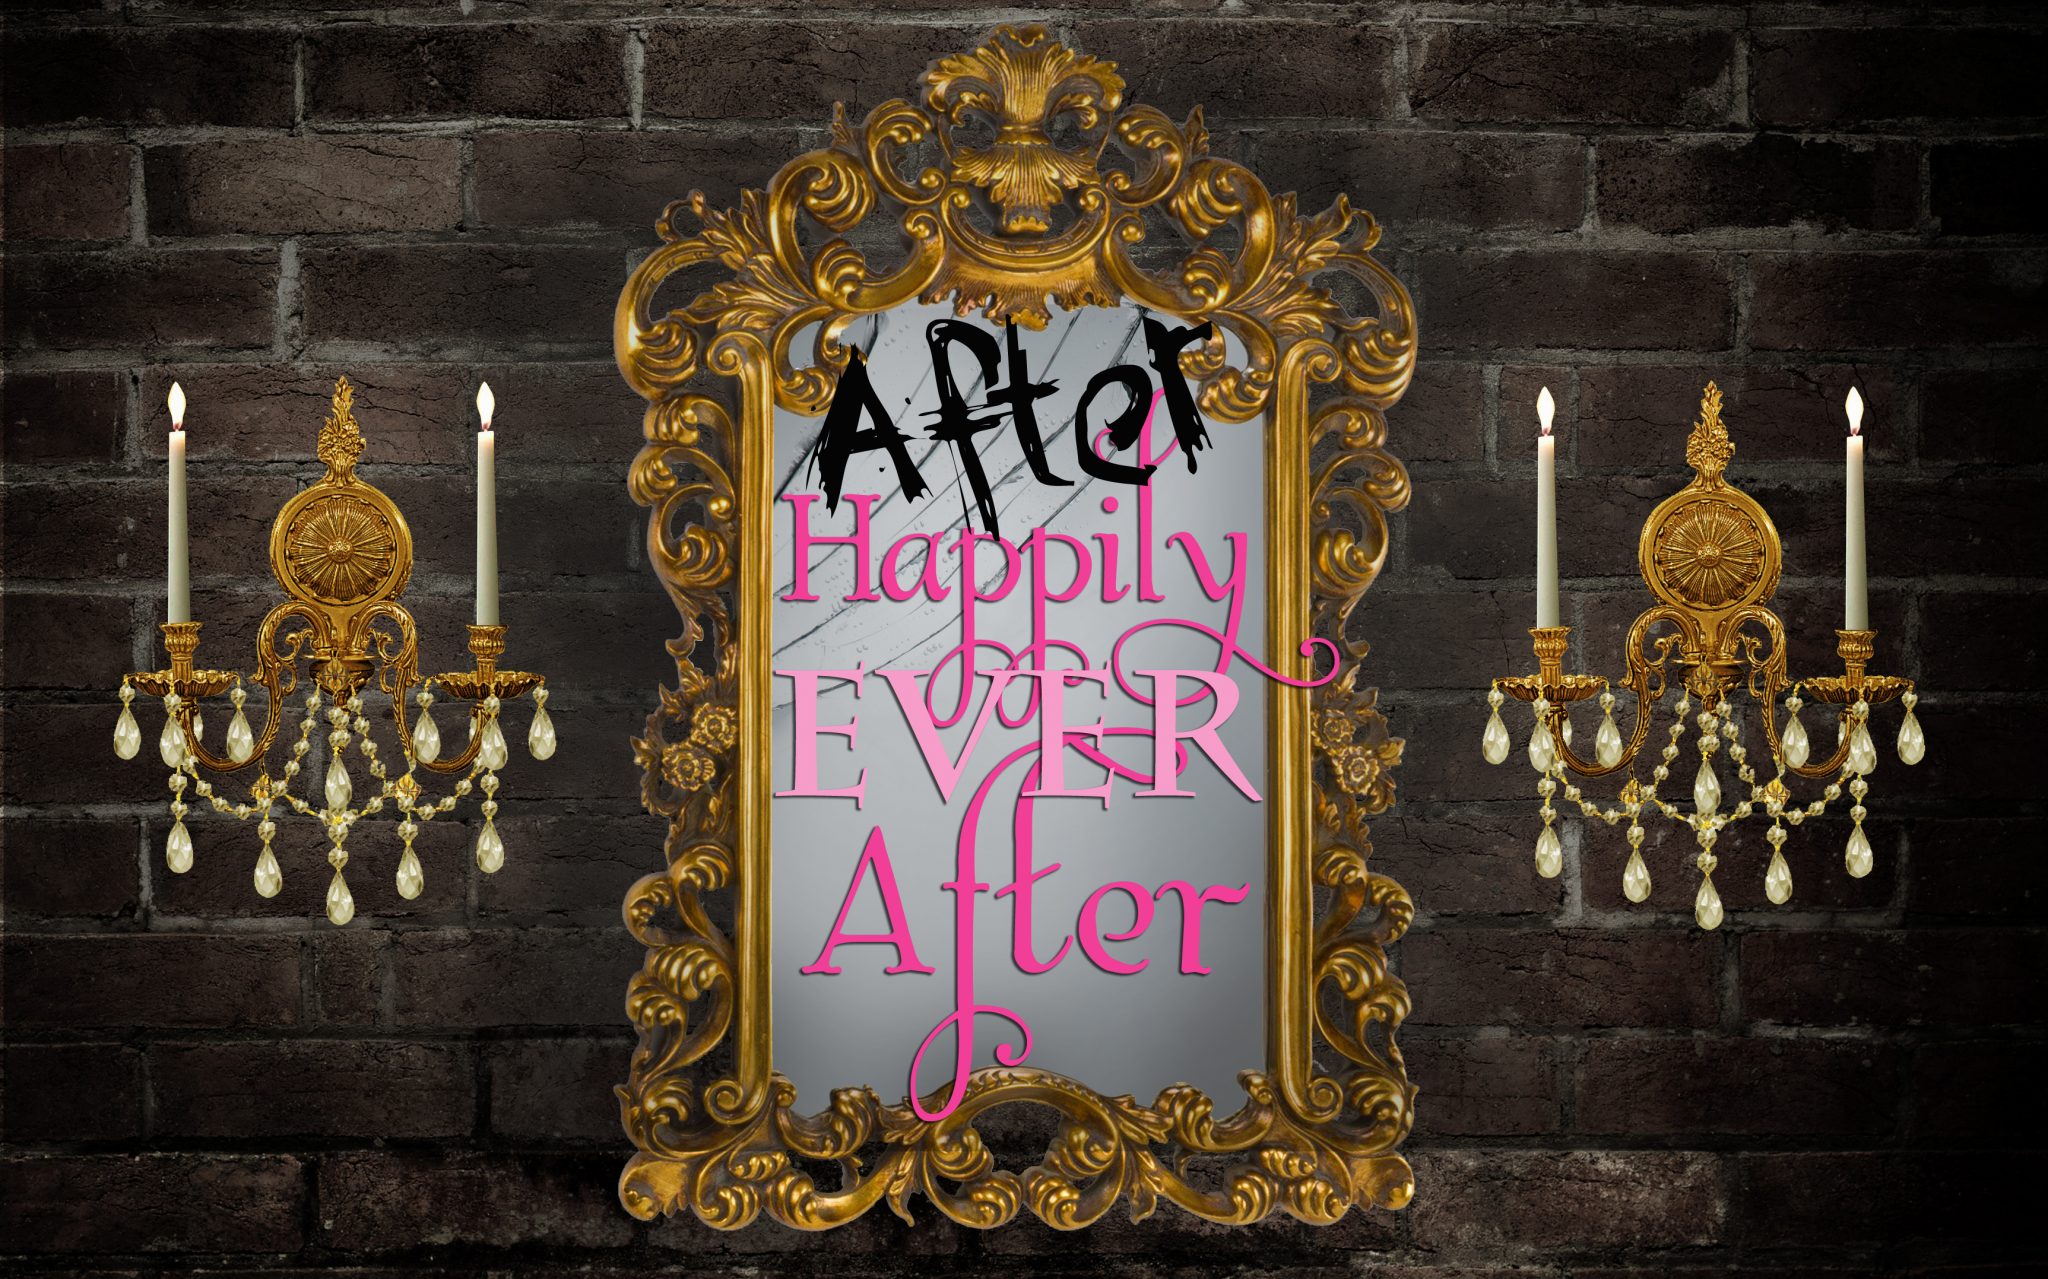 What happens AFTER Happily Ever After?